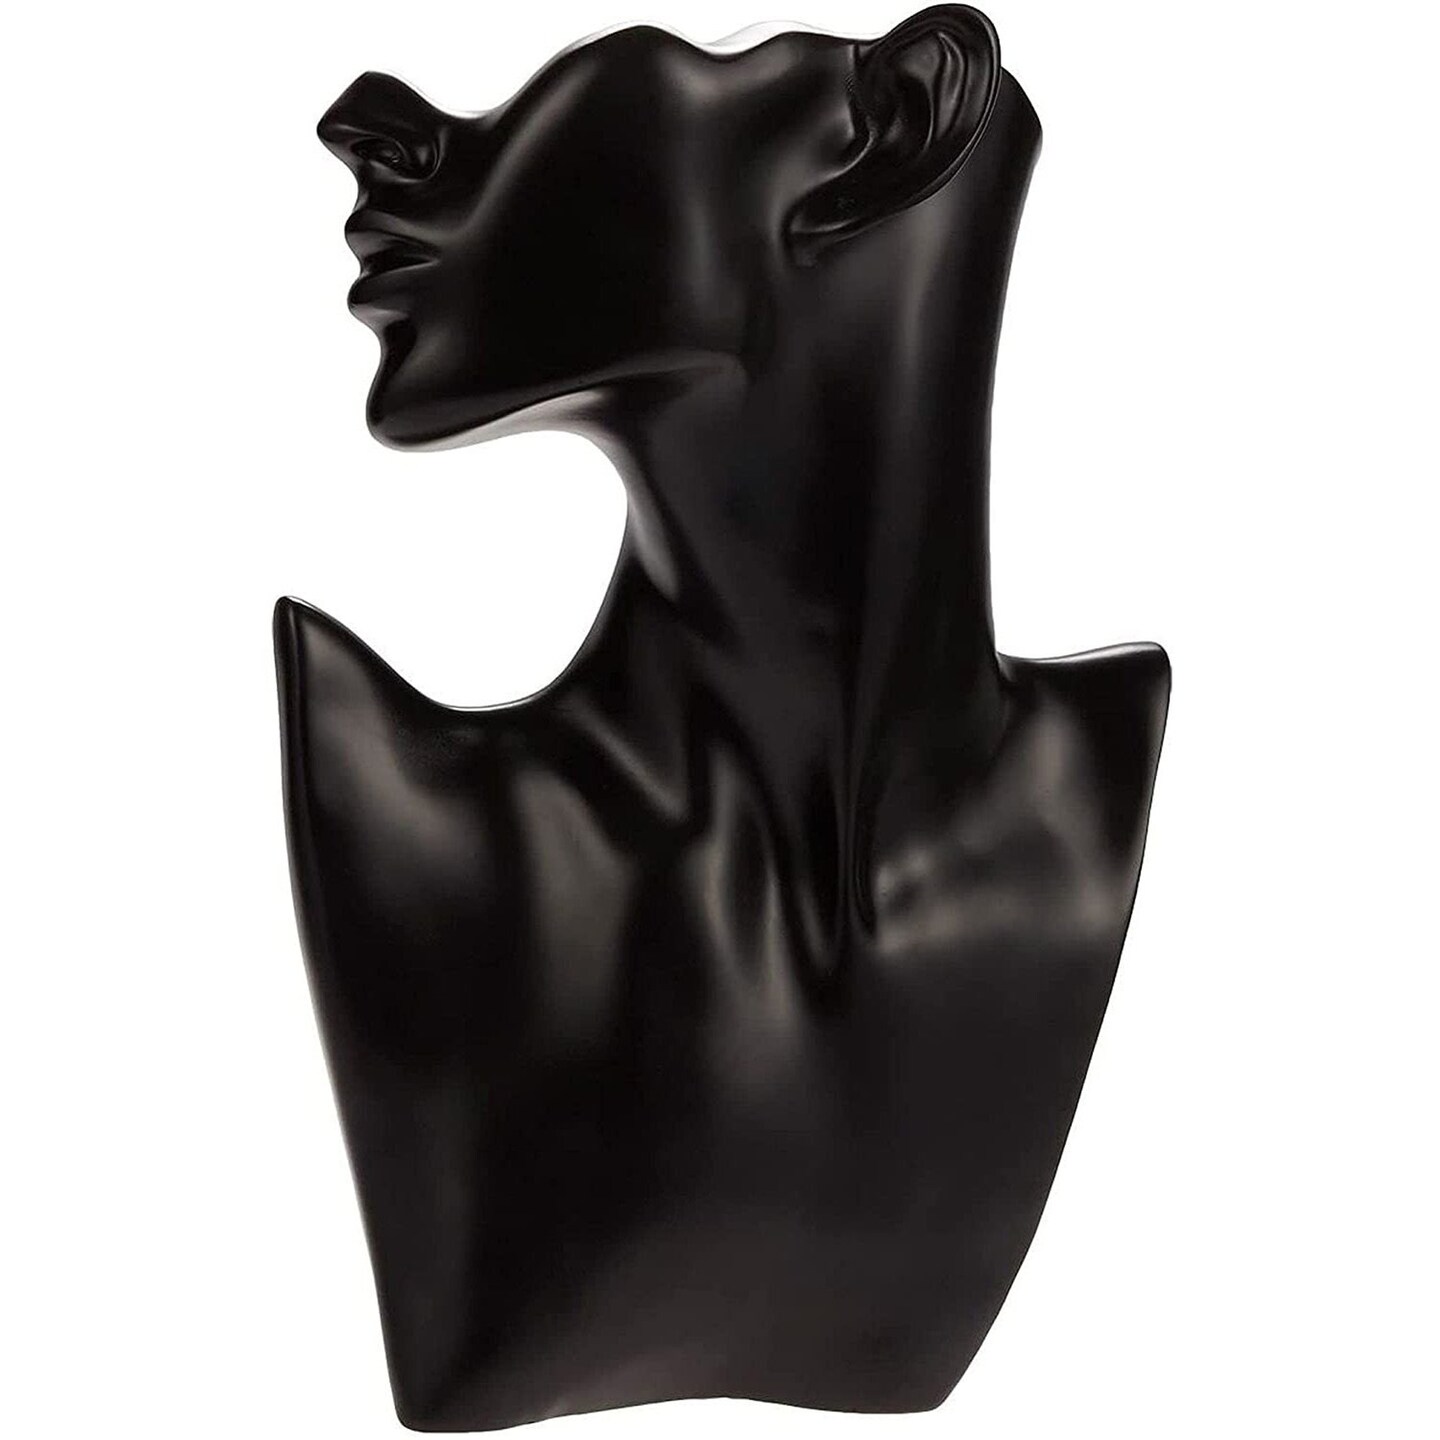 Boutique Jewelry Mannequin Display Bust for Necklace, Pendant, Earrings (7.5 x 11 x 2 Inches, Black)